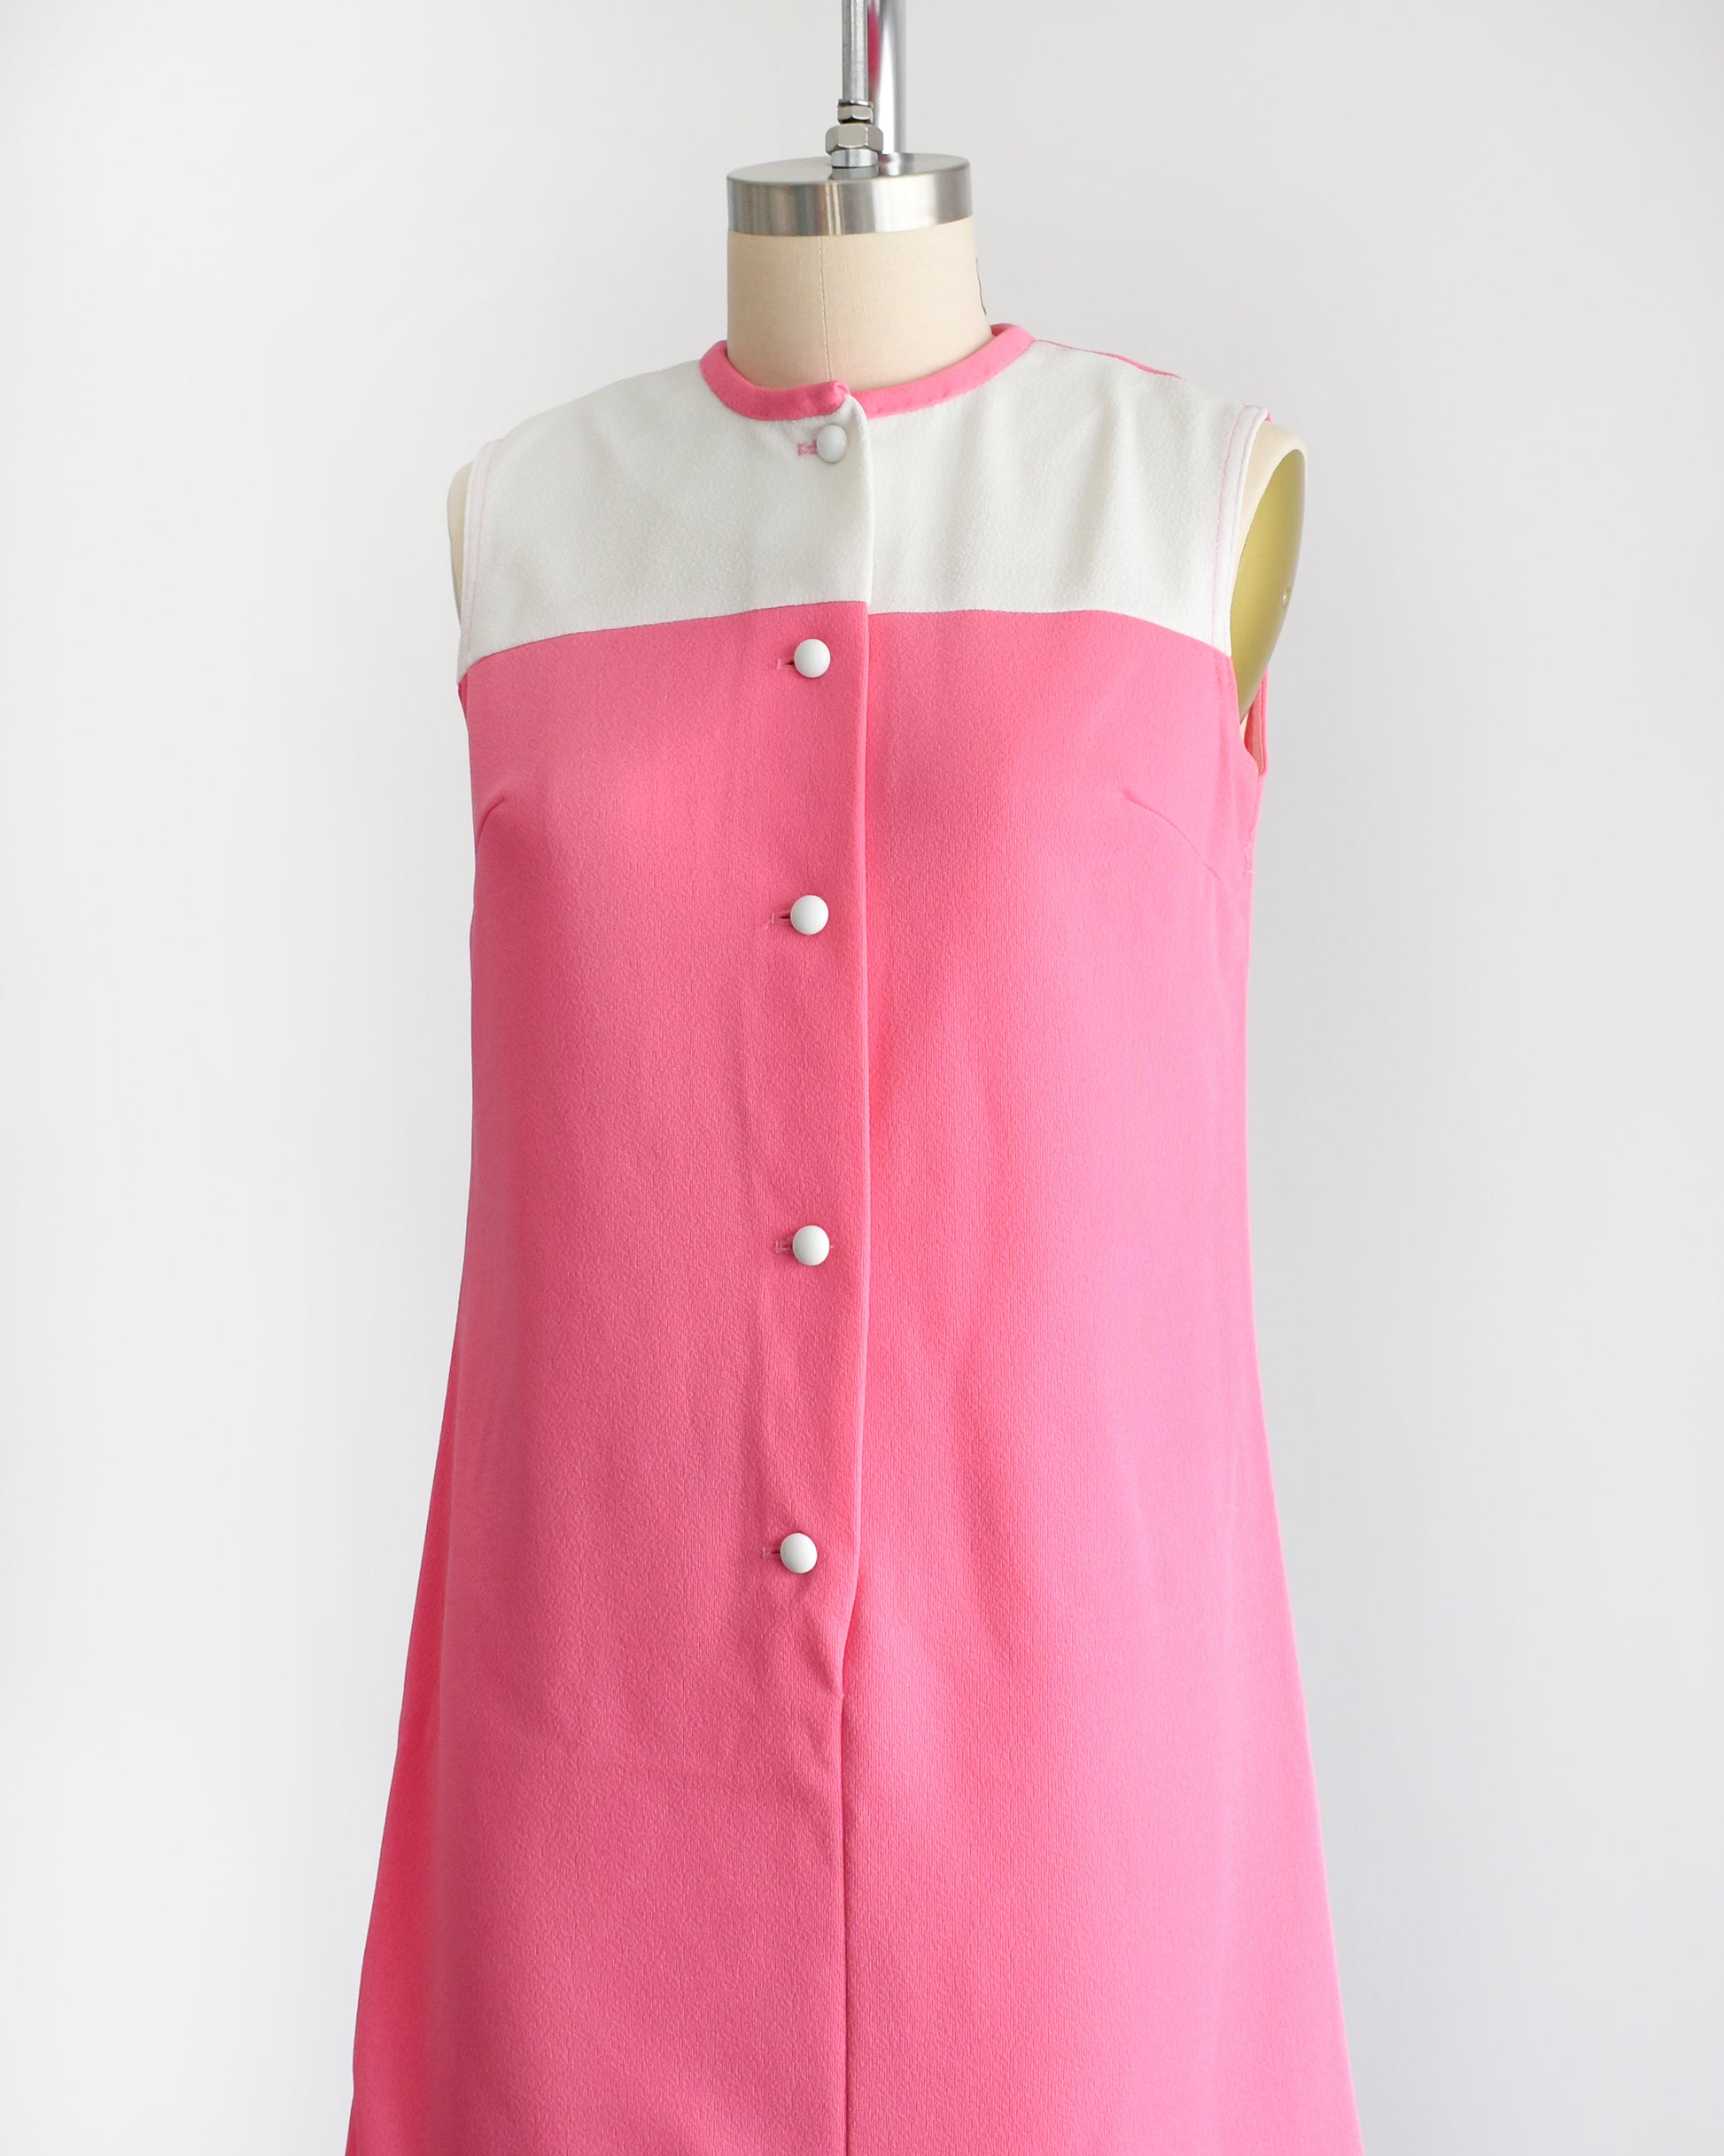 side front view of a vintage 1960s pink and white mod mini dress that has five white buttons down the front.